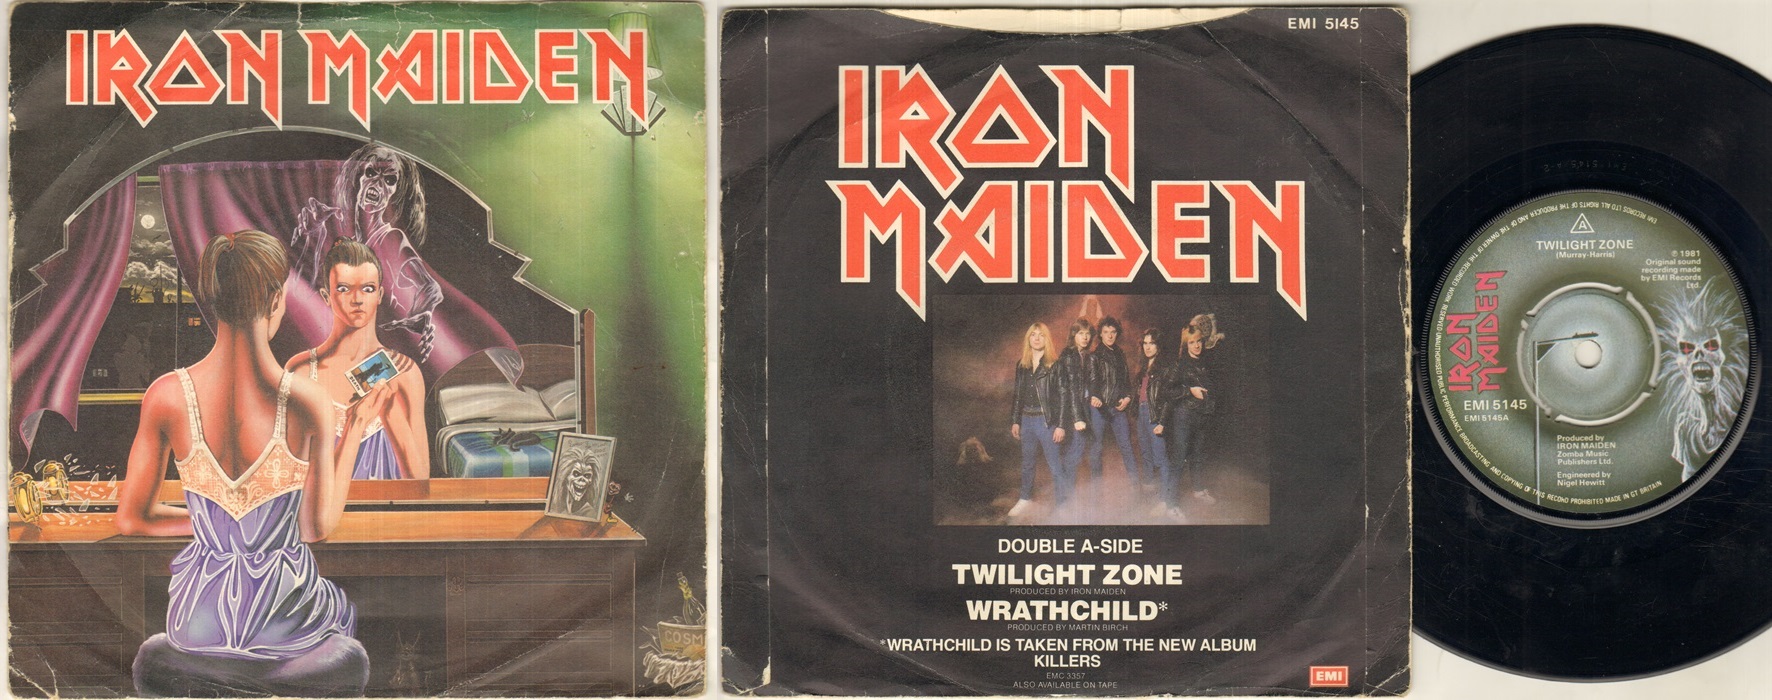 Iron Maiden Twilight Zone Records, LPs, Vinyl and CDs - MusicStack